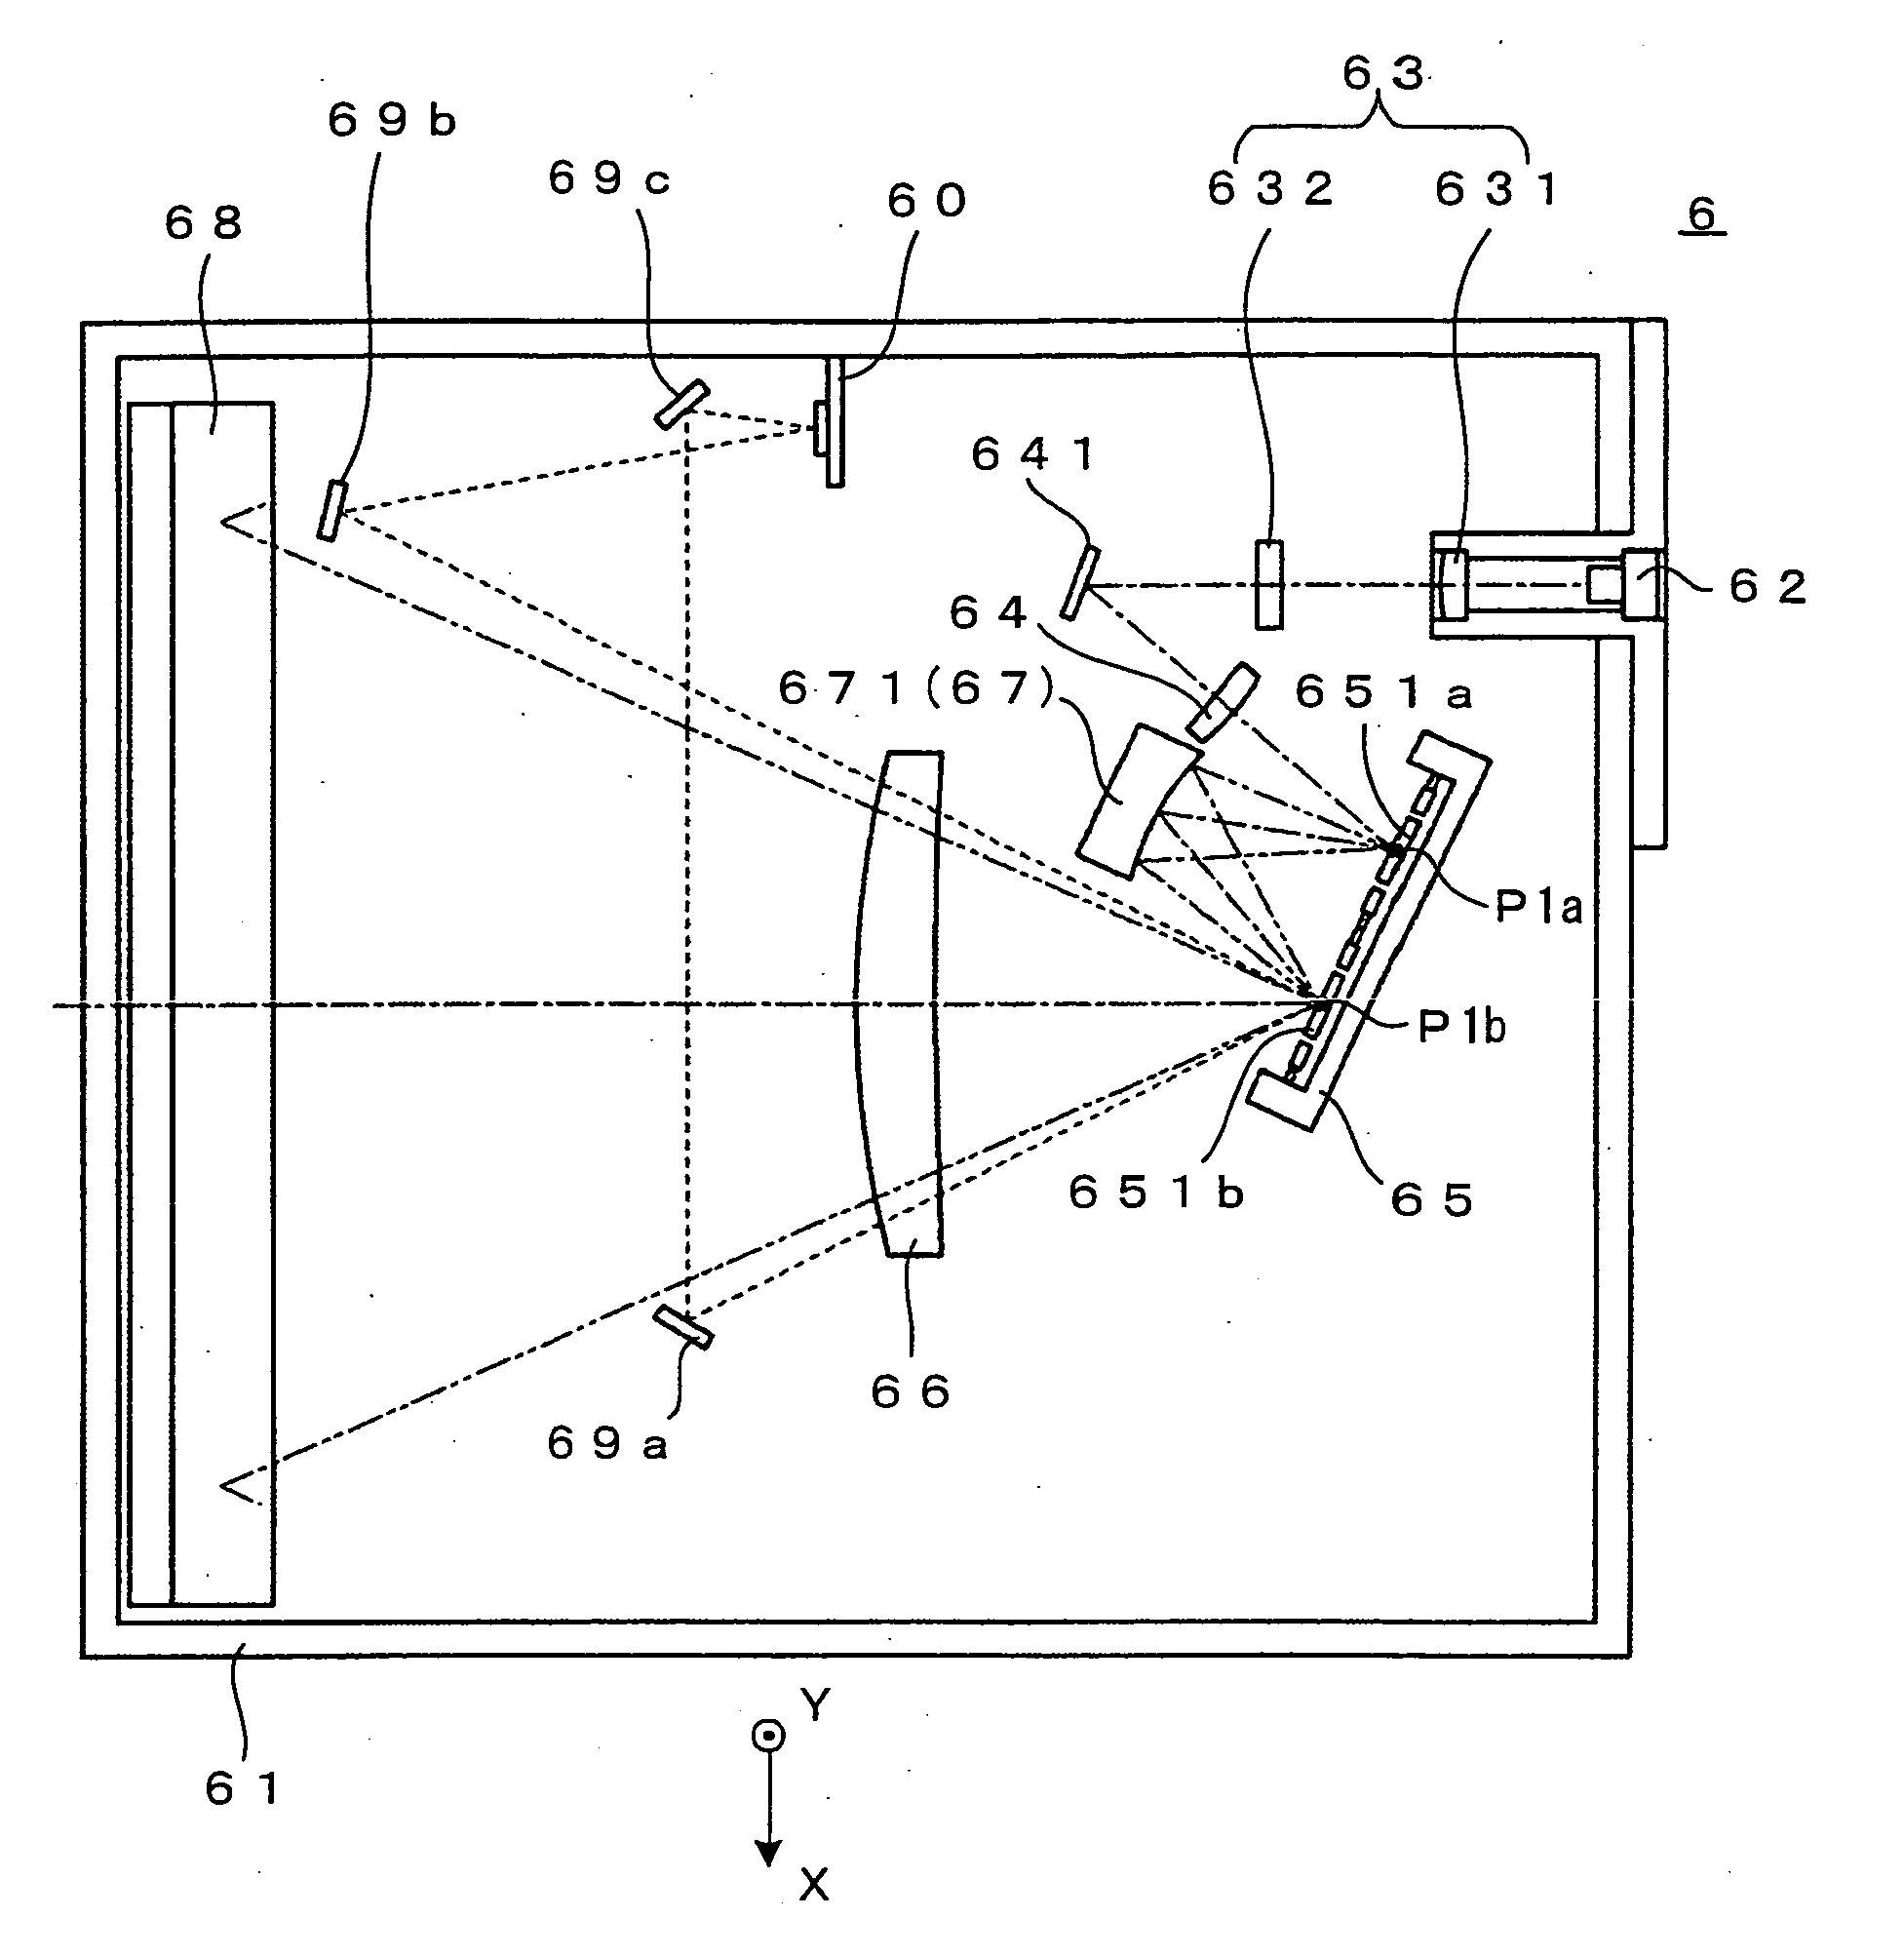 Optical scanning apparatus and image forming apparatus